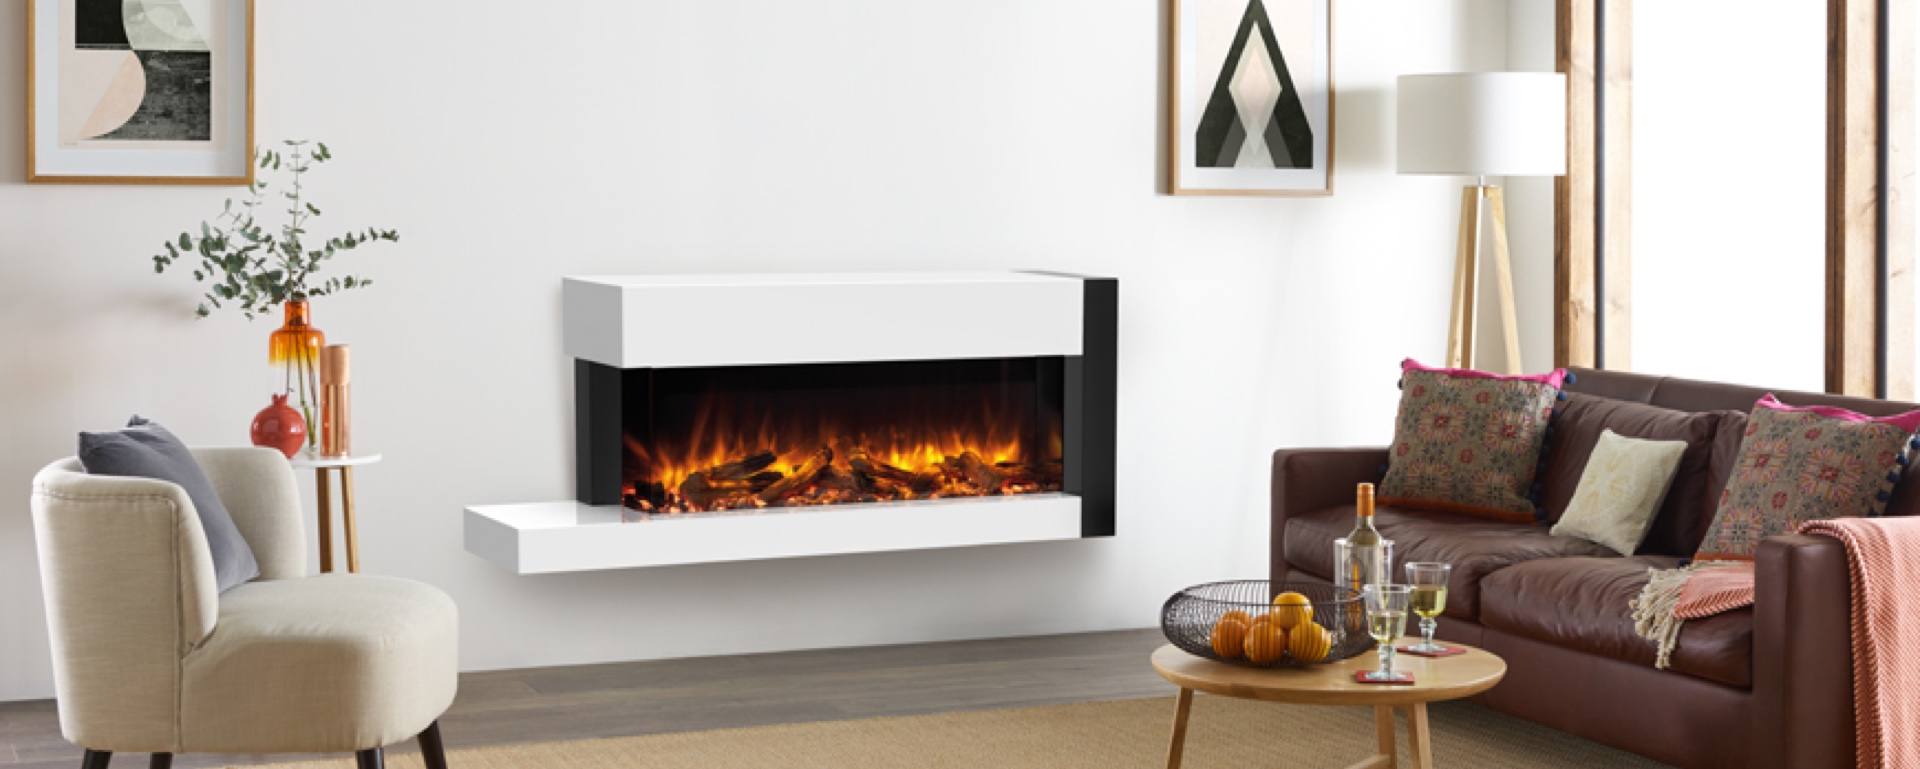 Gazco Skope Trento Suite Wall Mounted Electric Fire